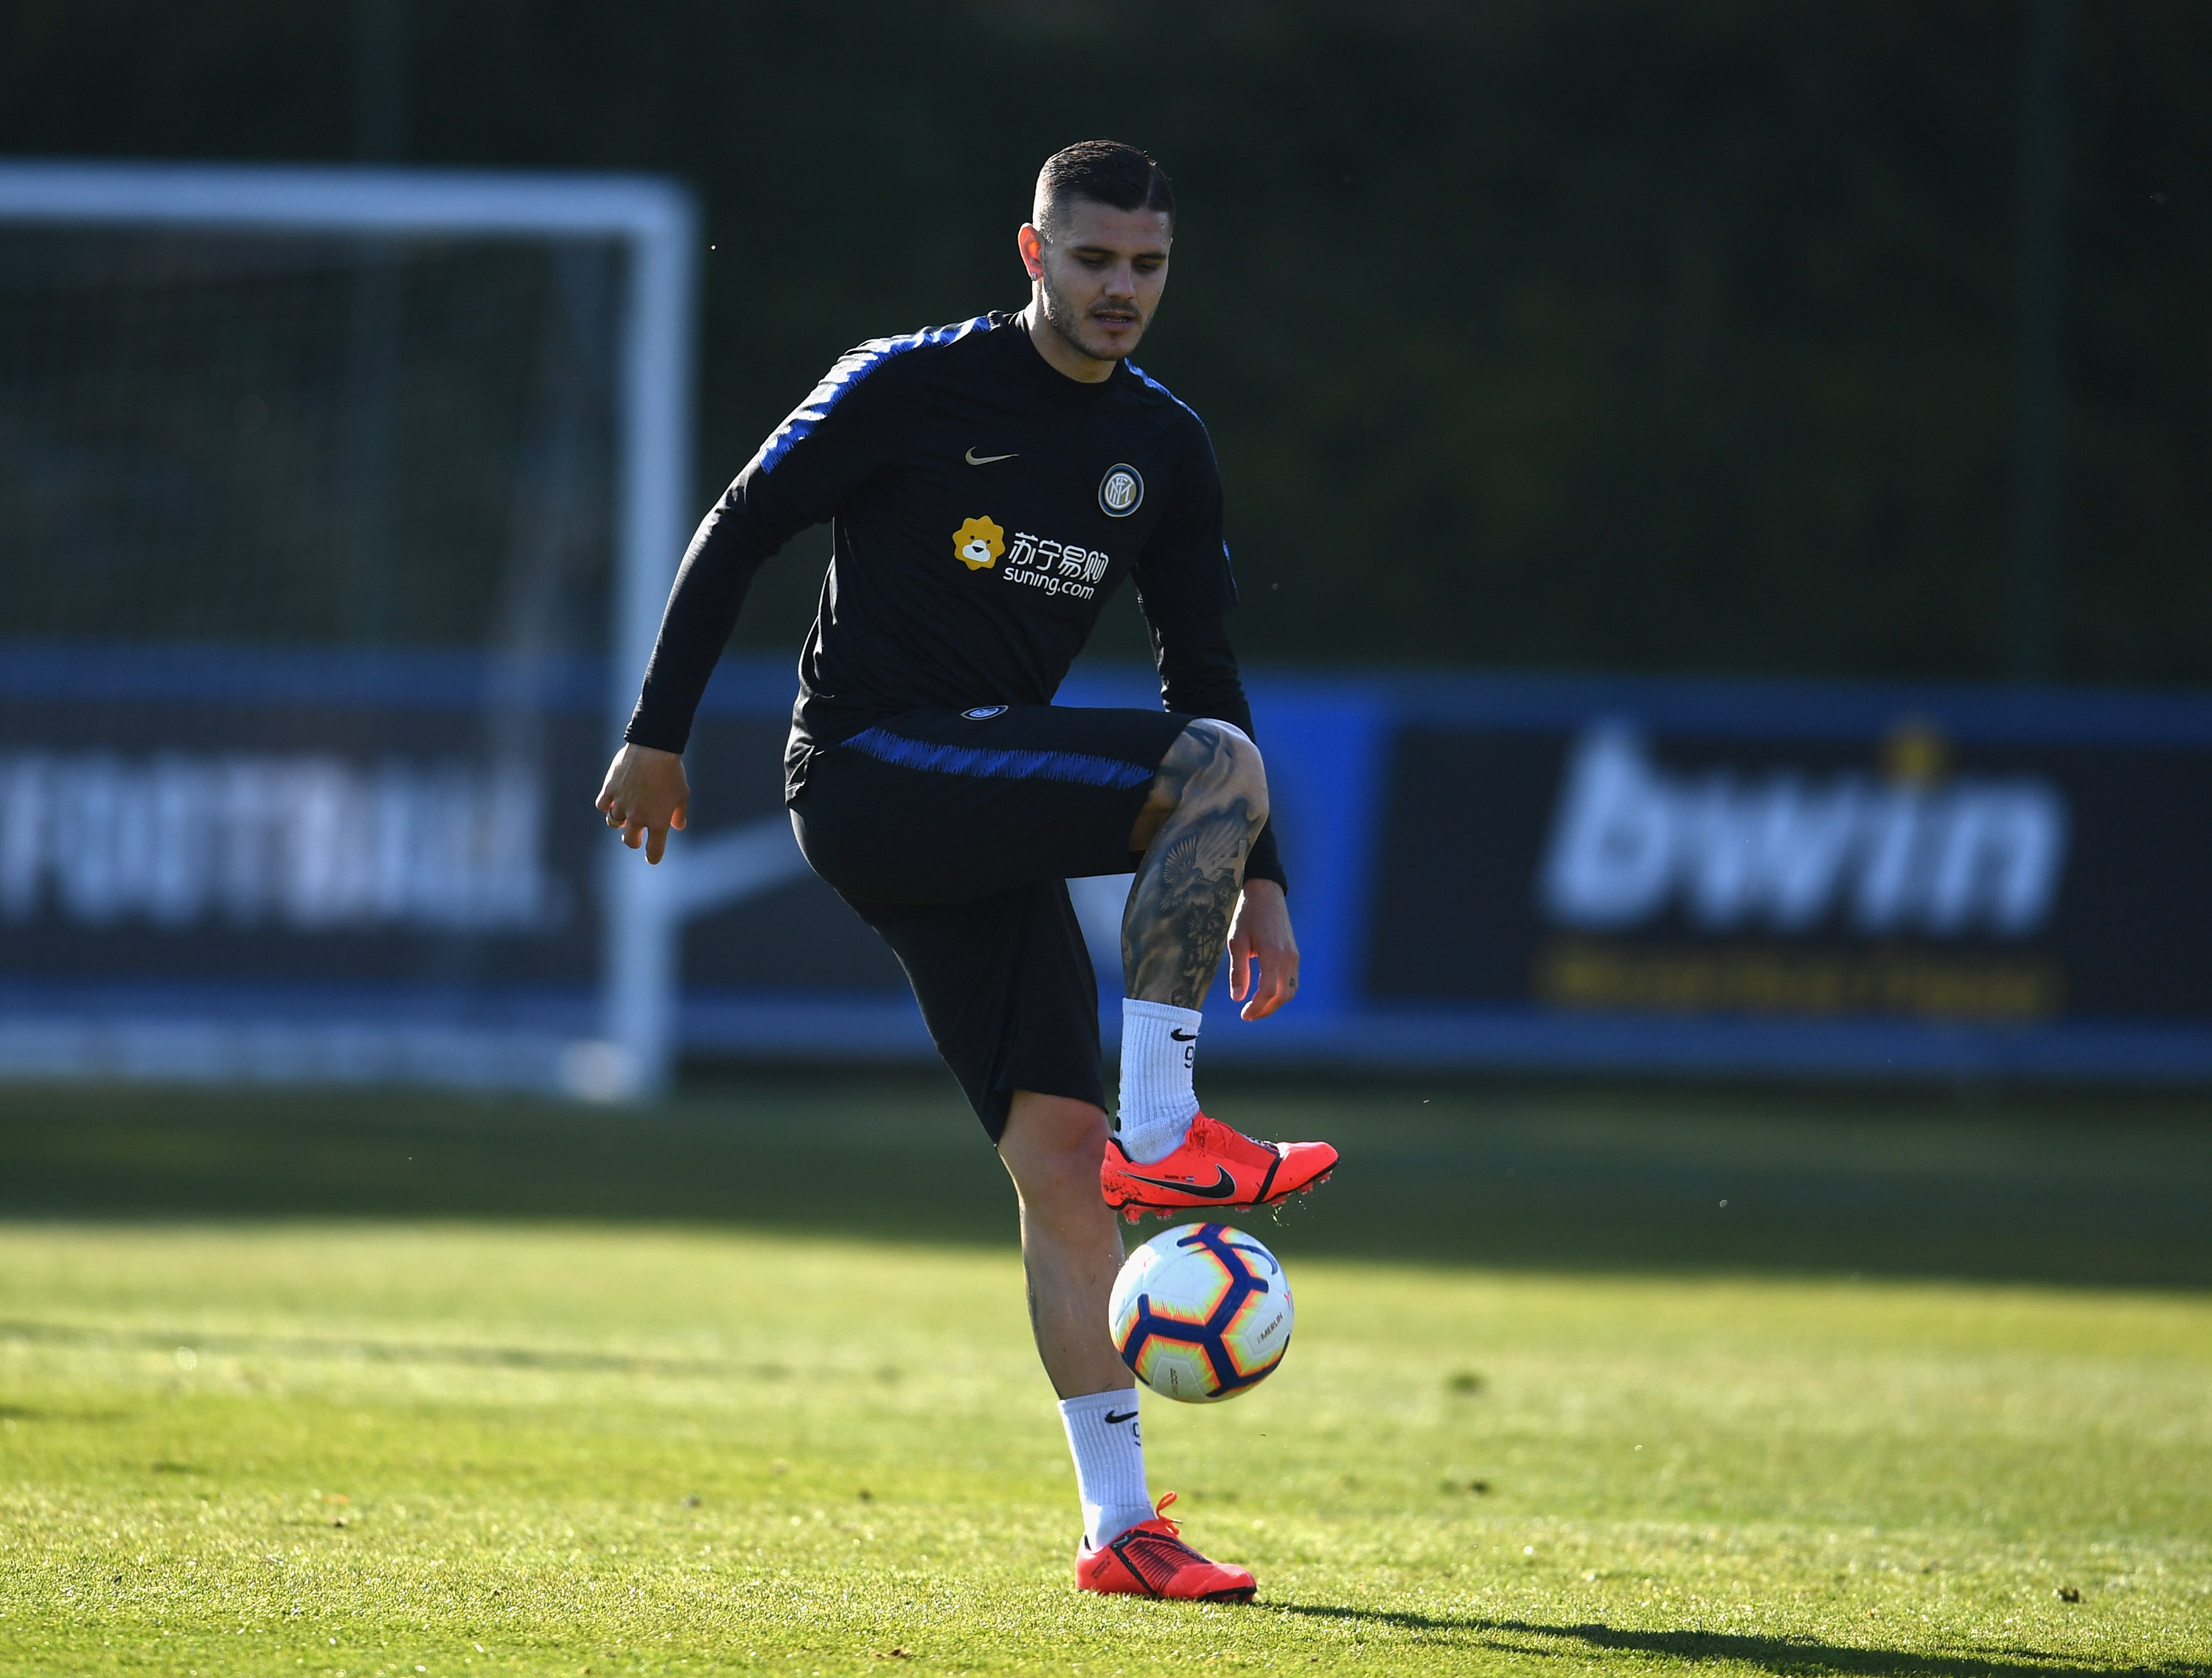 COMO, ITALY - MARCH 28:  Mauro Icardi of FC Internazionale in action during a training session at the club's training ground Suning Training Center in memory of Angelo Moratti at Appiano Gentile on March 28, 2019 in Como, Italy.  (Photo by Claudio Villa - Inter/Inter via Getty Images)